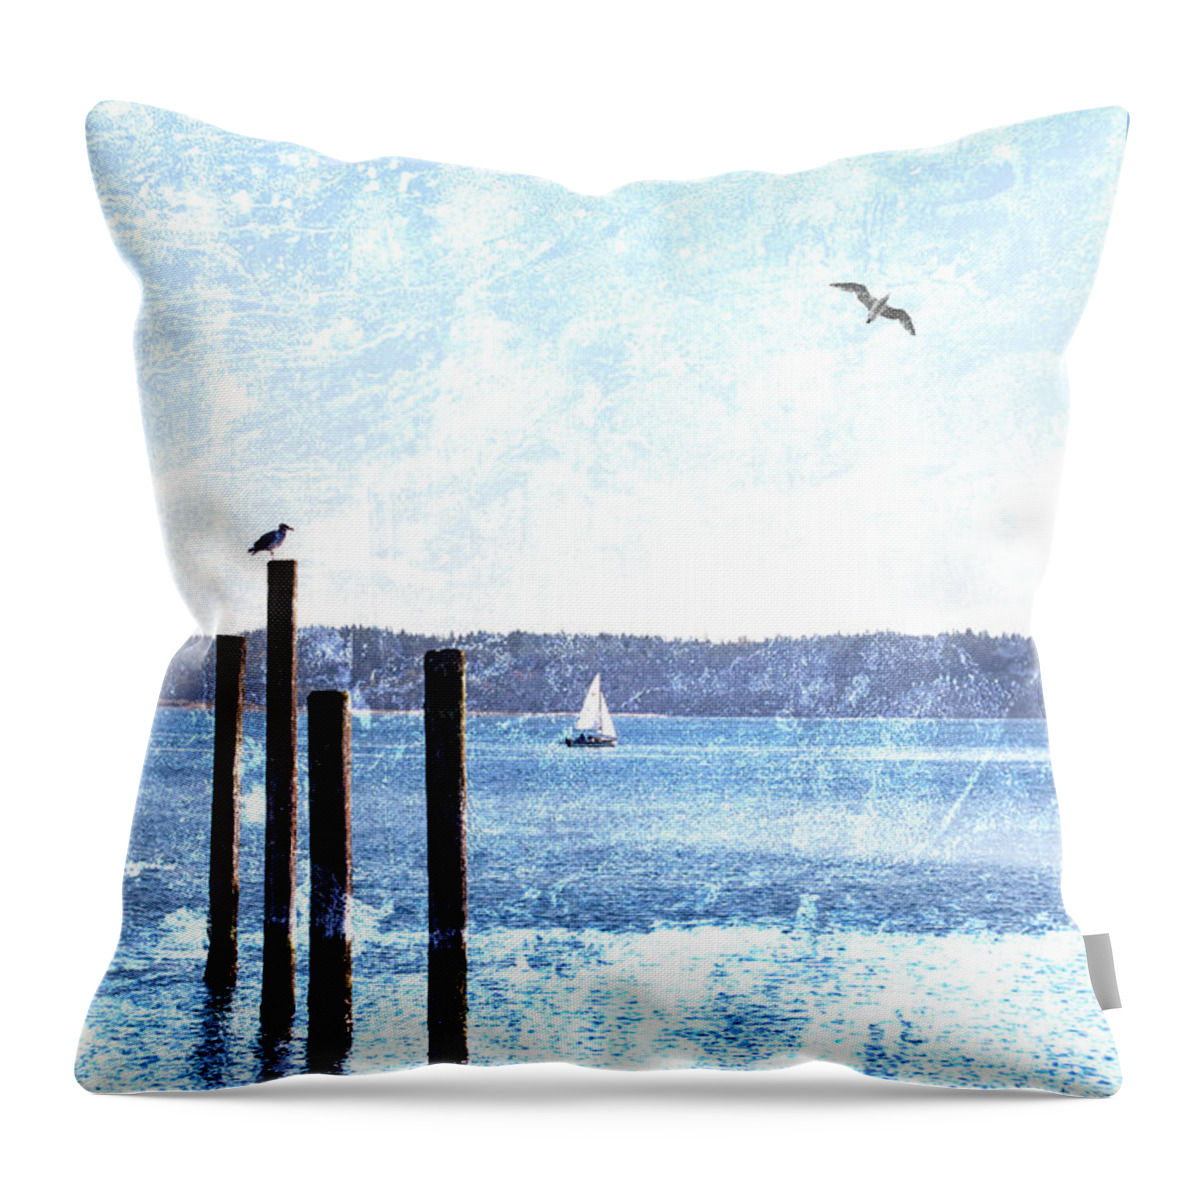 Port Townsend Throw Pillow featuring the mixed media Port Townsend Pilings by Carol Leigh